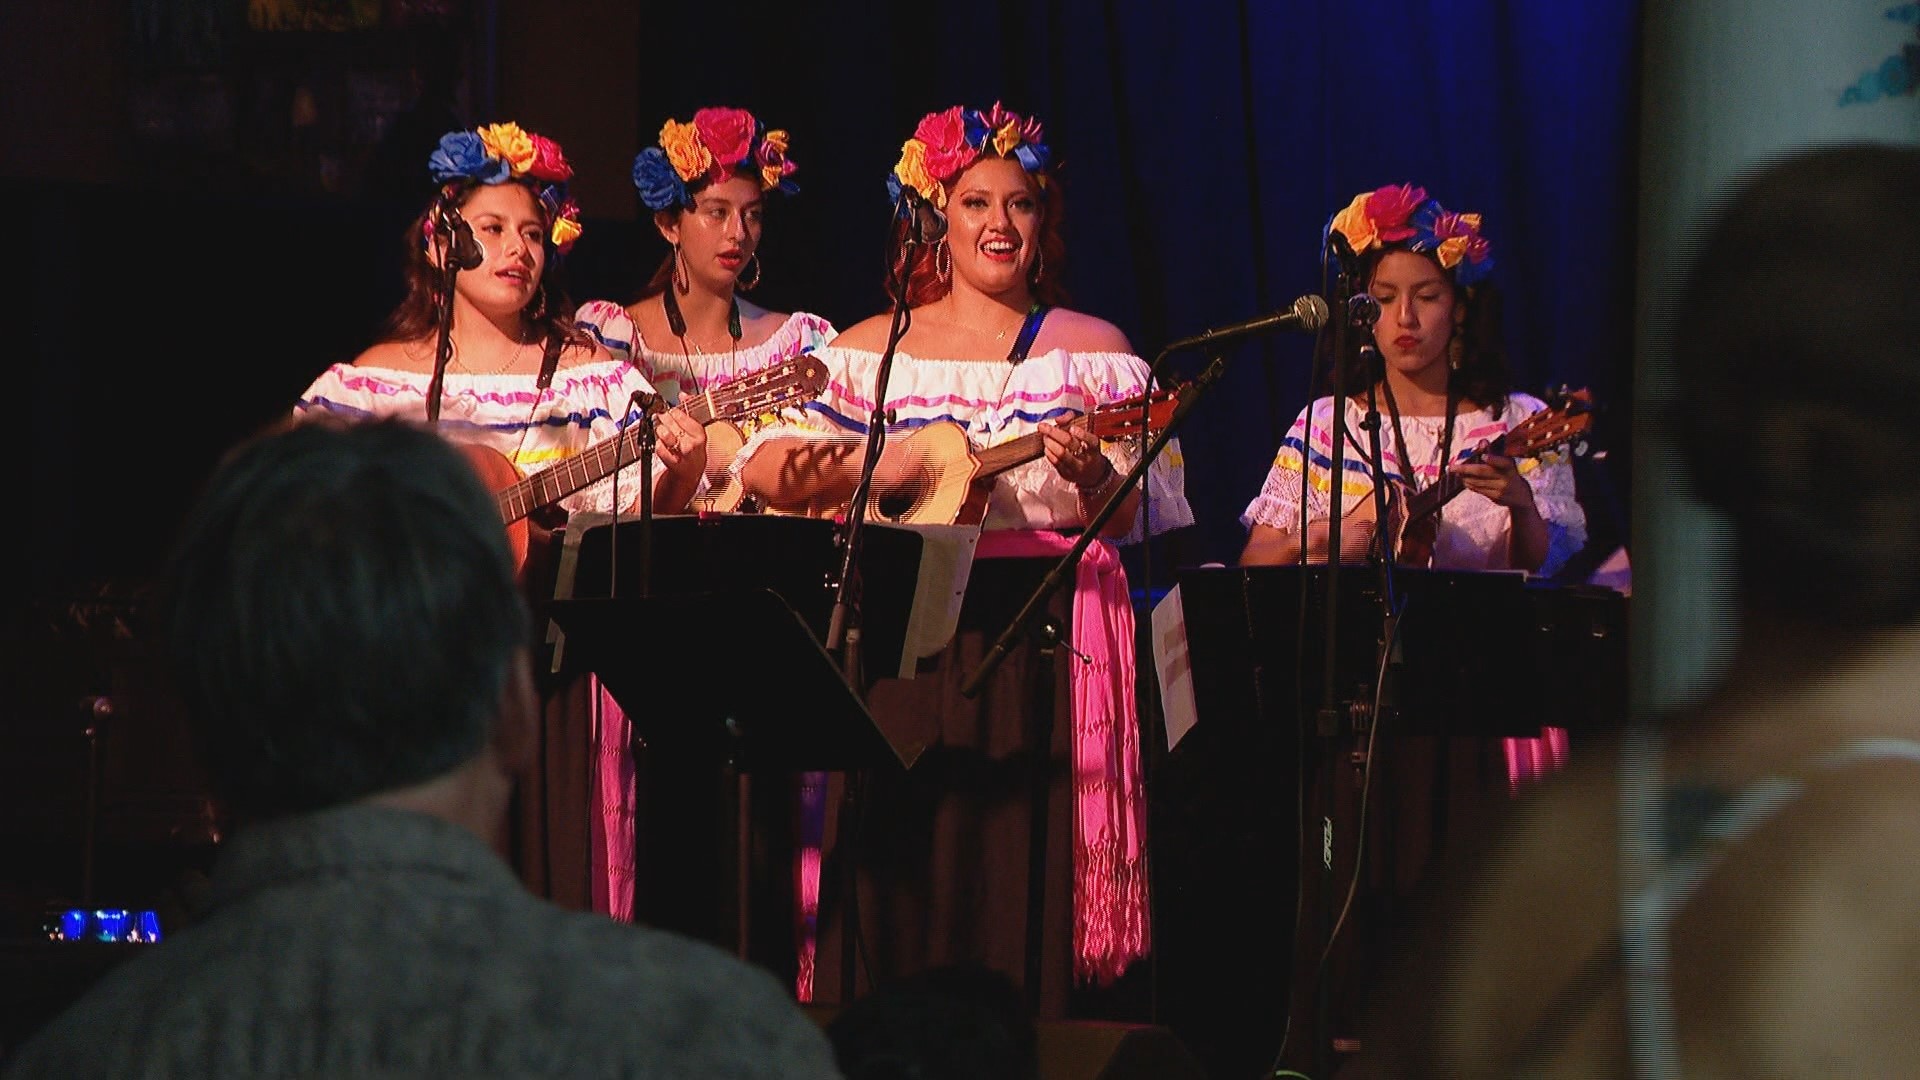 Mariachi has long been dominated by men, but the first all-female Colorado-based Mariachi band has been gaining traction in Denver